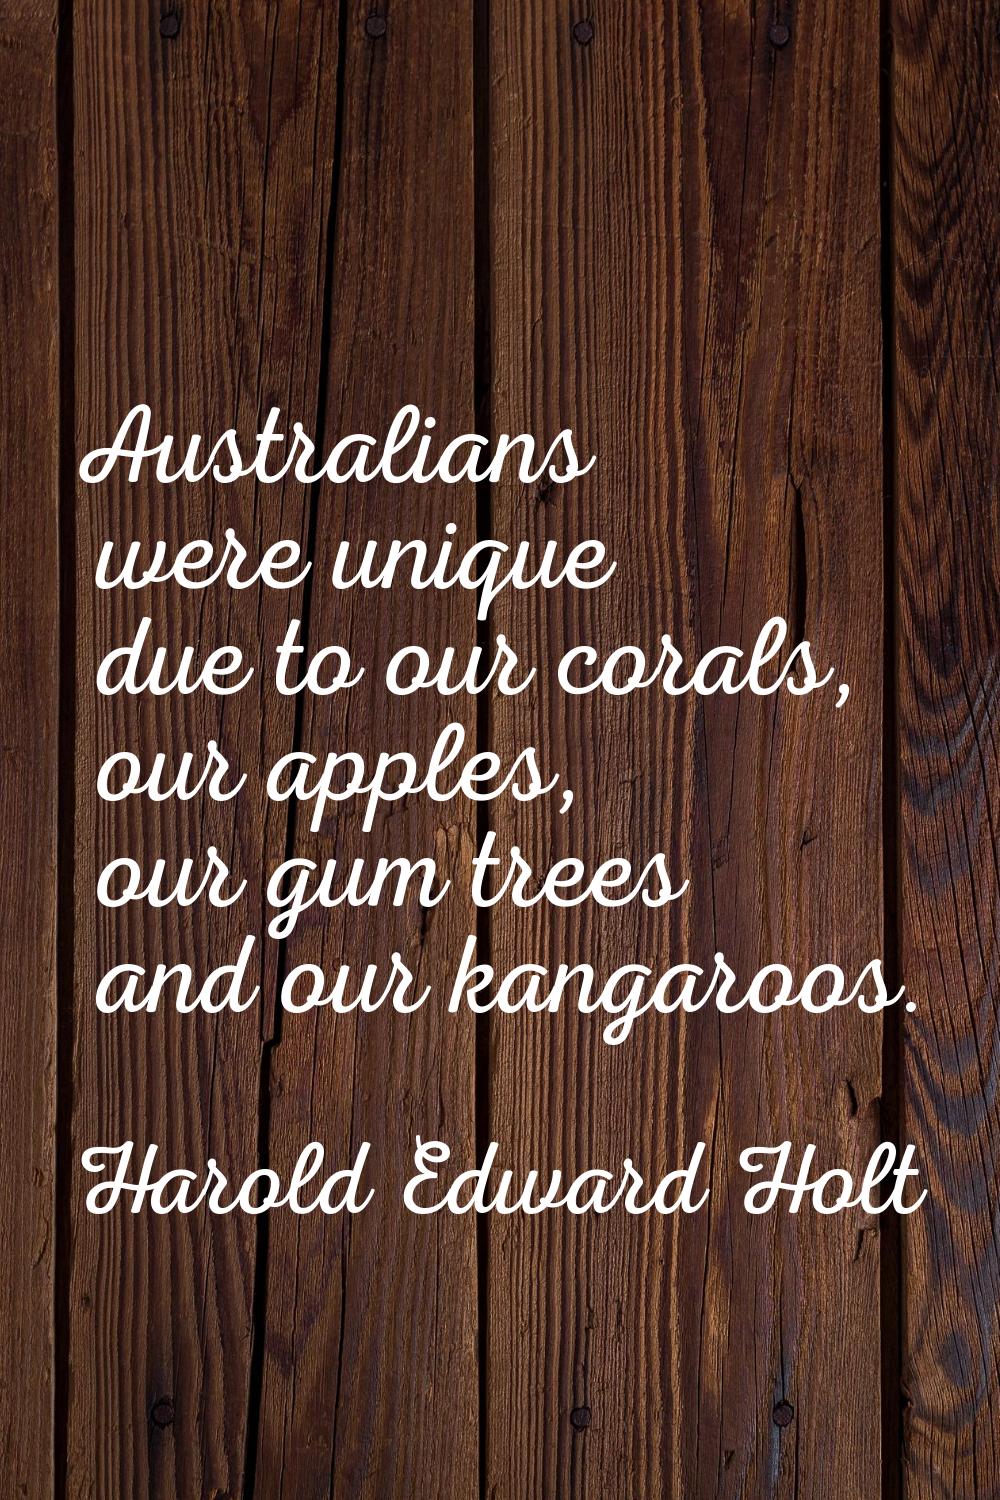 Australians were unique due to our corals, our apples, our gum trees and our kangaroos.